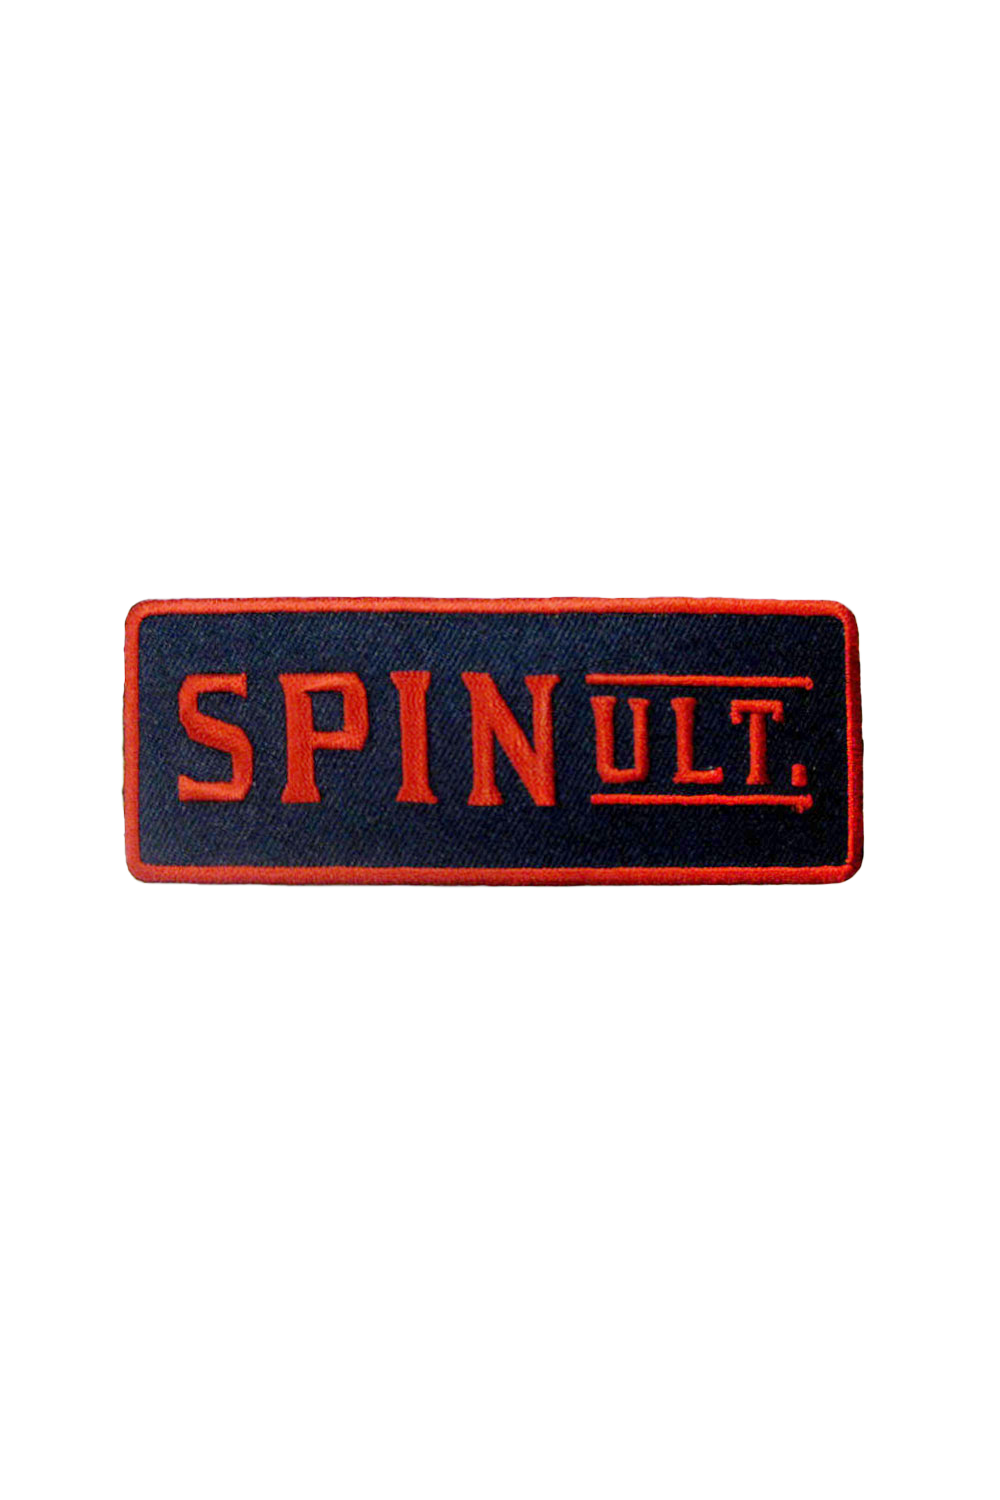 Spin Bold Patch (Navy/Red)